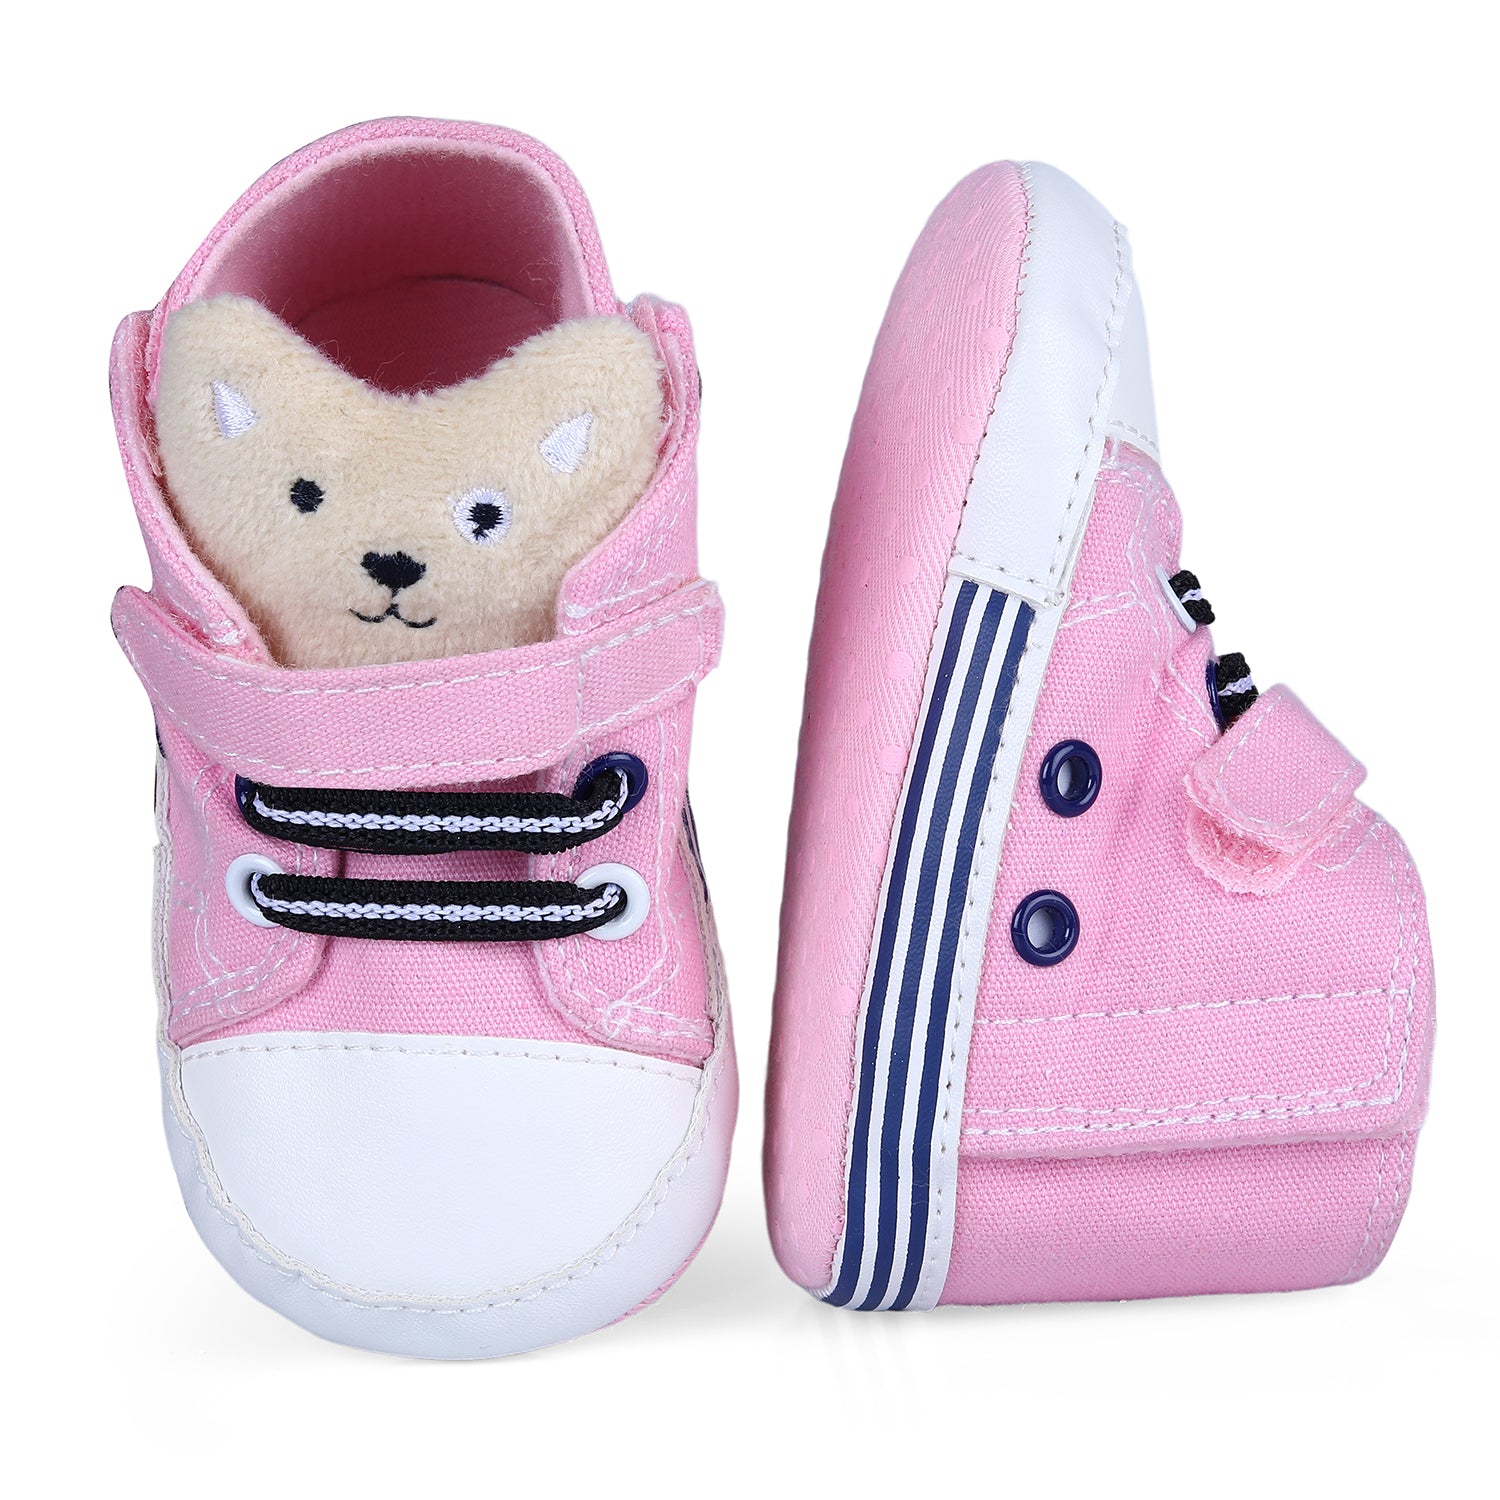 Baby Moo My Buddy Bear Cute And Stylish Comfy Booties - Pink